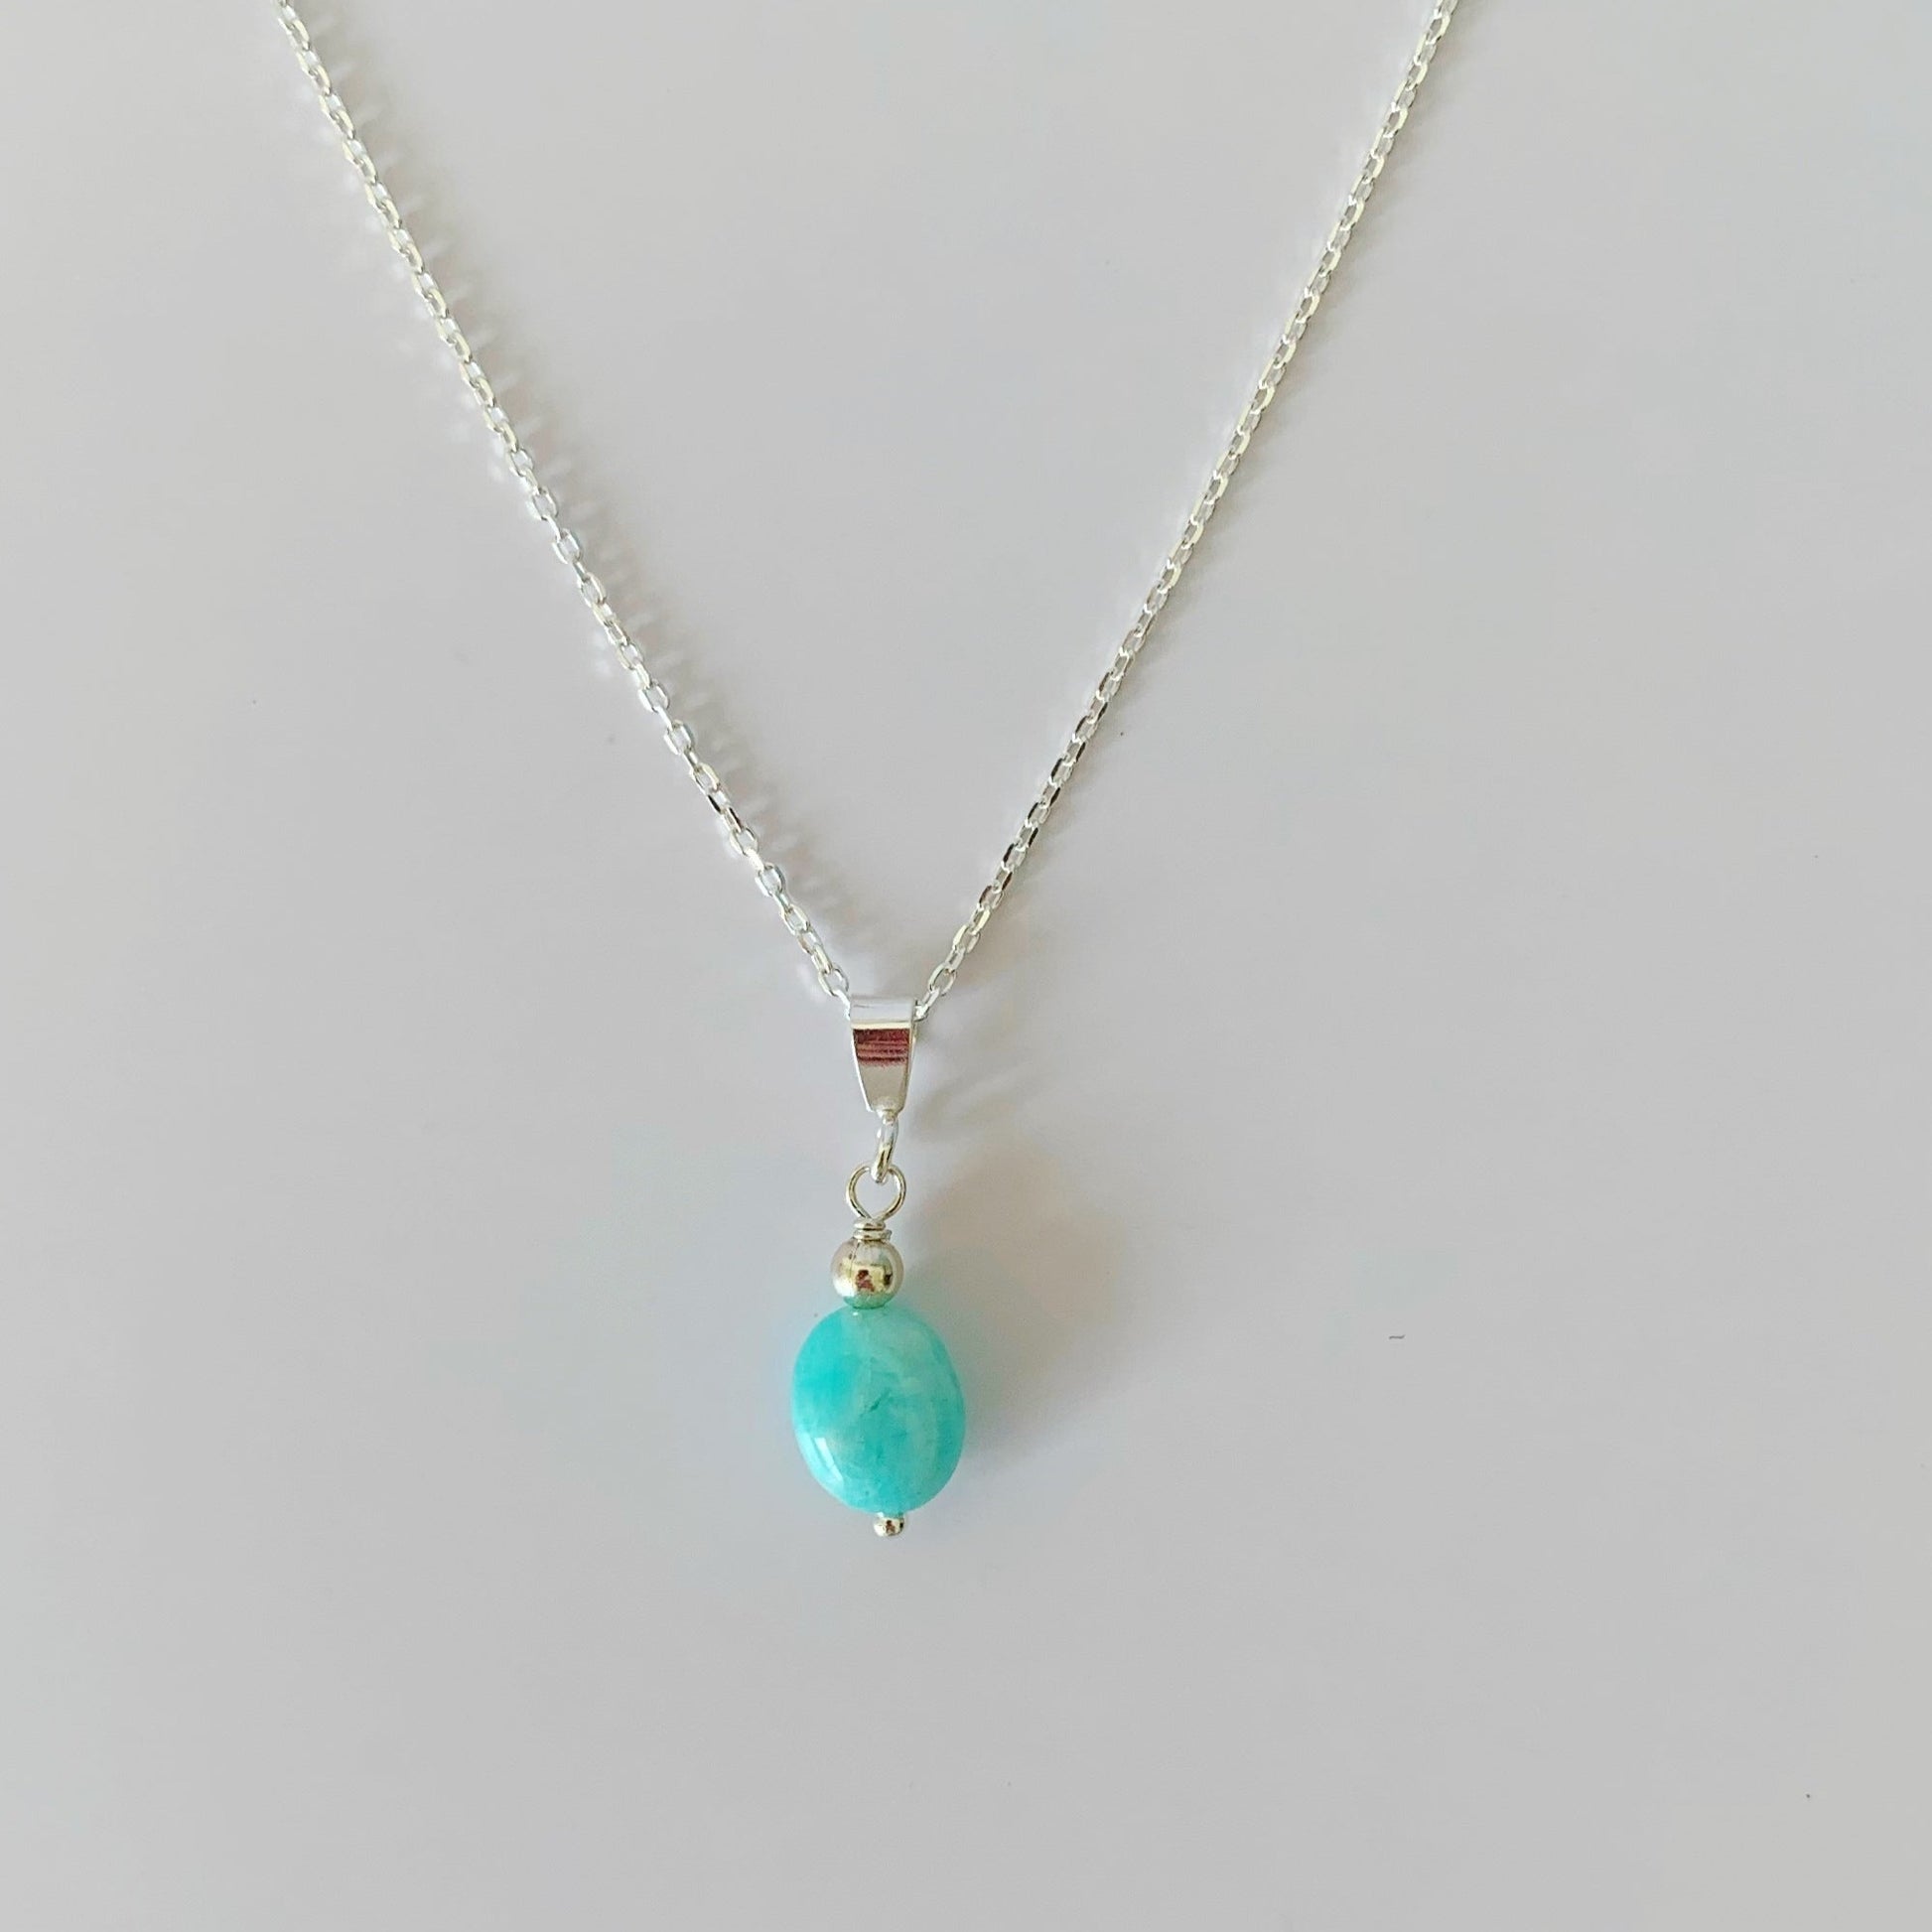 The Mermaids and madeleines laguna pendant is created with an oval amazonite drop on sterling silver chain. this necklace is photographed on a white table